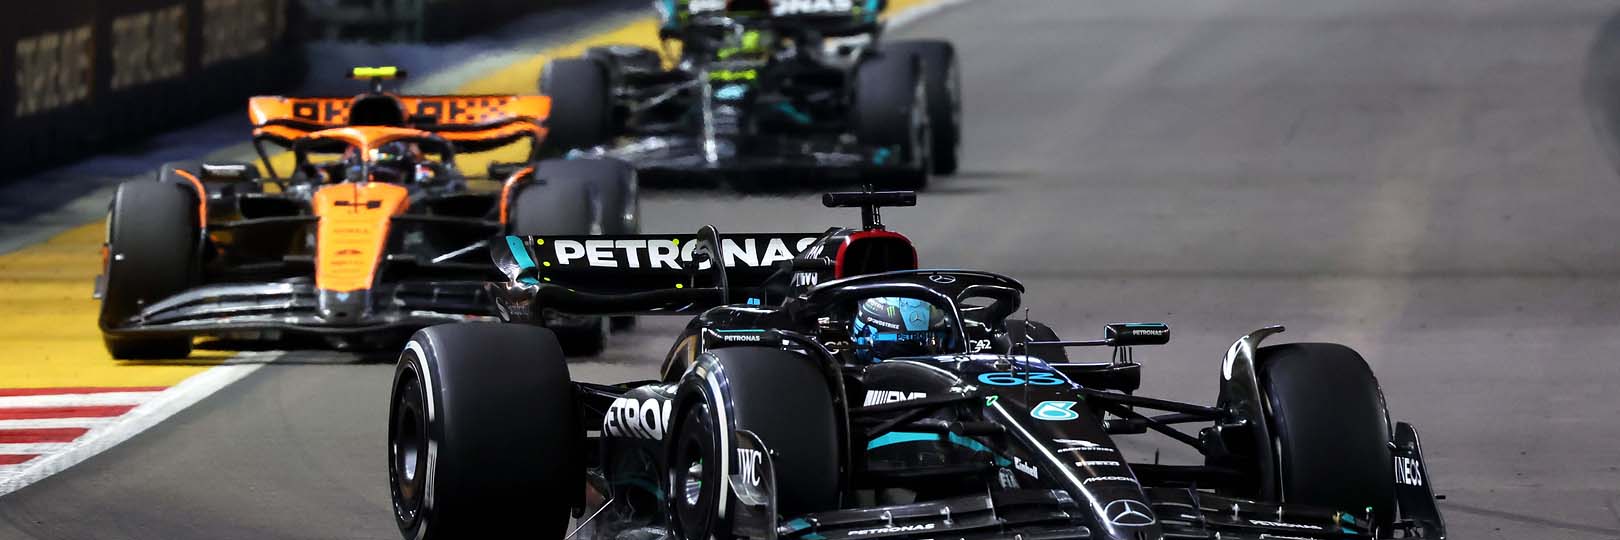 George Russell, Lando Norris and Lewis Hamilton on track at the Singapore Grand Prix